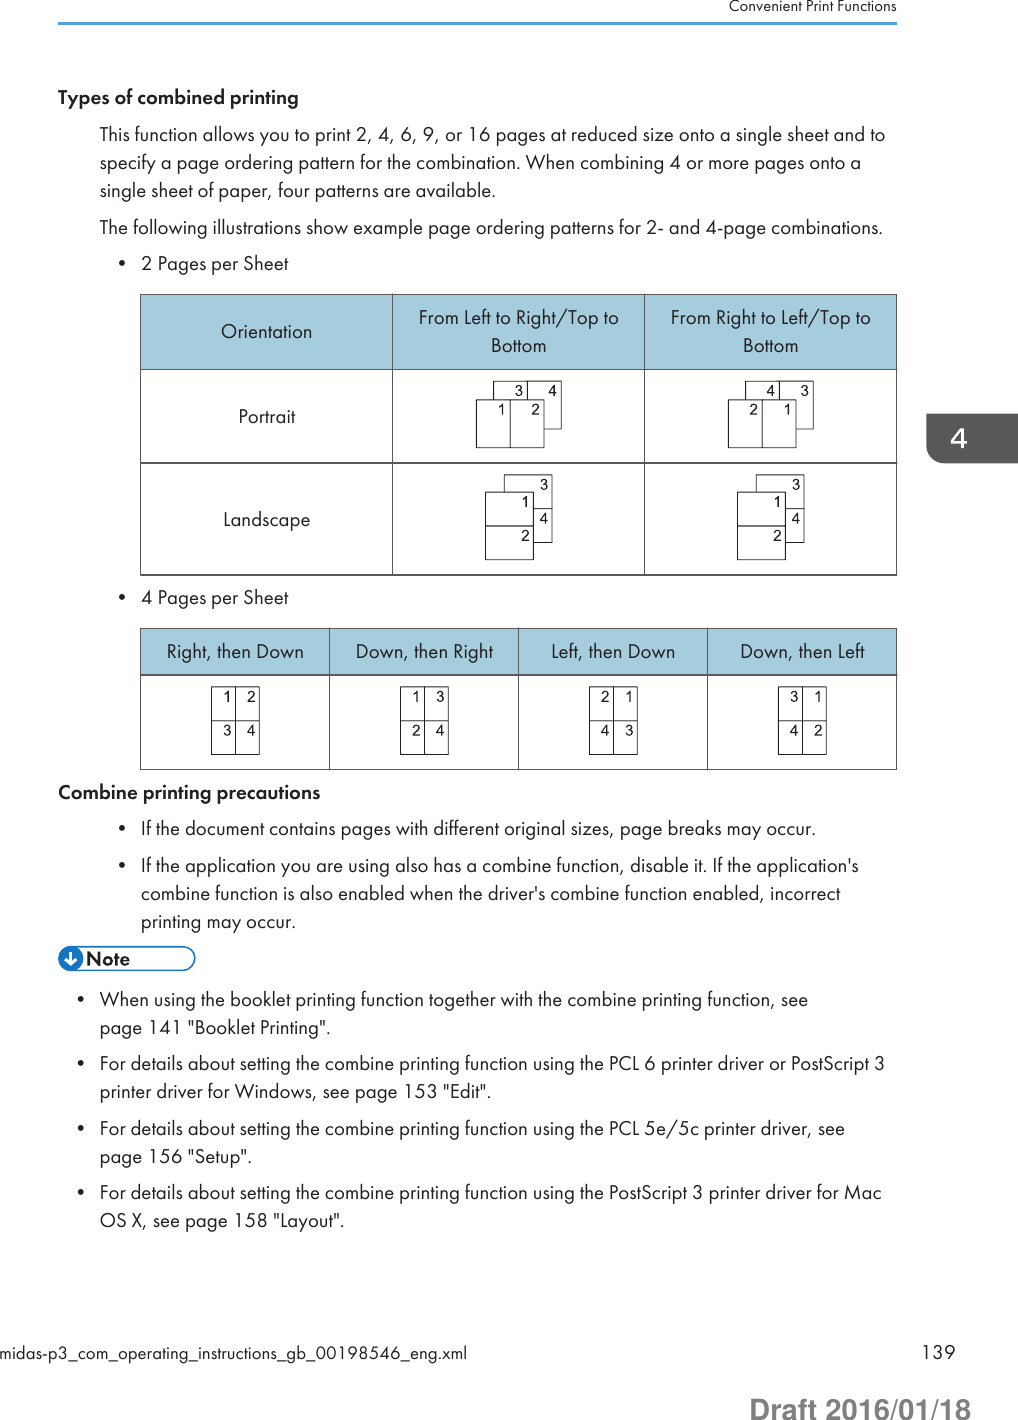 Types of combined printingThis function allows you to print 2, 4, 6, 9, or 16 pages at reduced size onto a single sheet and tospecify a page ordering pattern for the combination. When combining 4 or more pages onto asingle sheet of paper, four patterns are available.The following illustrations show example page ordering patterns for 2- and 4-page combinations.• 2 Pages per SheetOrientation From Left to Right/Top toBottomFrom Right to Left/Top toBottomPortraitLandscape• 4 Pages per SheetRight, then Down Down, then Right Left, then Down Down, then LeftCombine printing precautions• If the document contains pages with different original sizes, page breaks may occur.• If the application you are using also has a combine function, disable it. If the application&apos;scombine function is also enabled when the driver&apos;s combine function enabled, incorrectprinting may occur.• When using the booklet printing function together with the combine printing function, seepage 141 &quot;Booklet Printing&quot;.• For details about setting the combine printing function using the PCL 6 printer driver or PostScript 3printer driver for Windows, see page 153 &quot;Edit&quot;.• For details about setting the combine printing function using the PCL 5e/5c printer driver, seepage 156 &quot;Setup&quot;.• For details about setting the combine printing function using the PostScript 3 printer driver for MacOS X, see page 158 &quot;Layout&quot;.Convenient Print Functionsmidas-p3_com_operating_instructions_gb_00198546_eng.xml 139Draft 2016/01/18